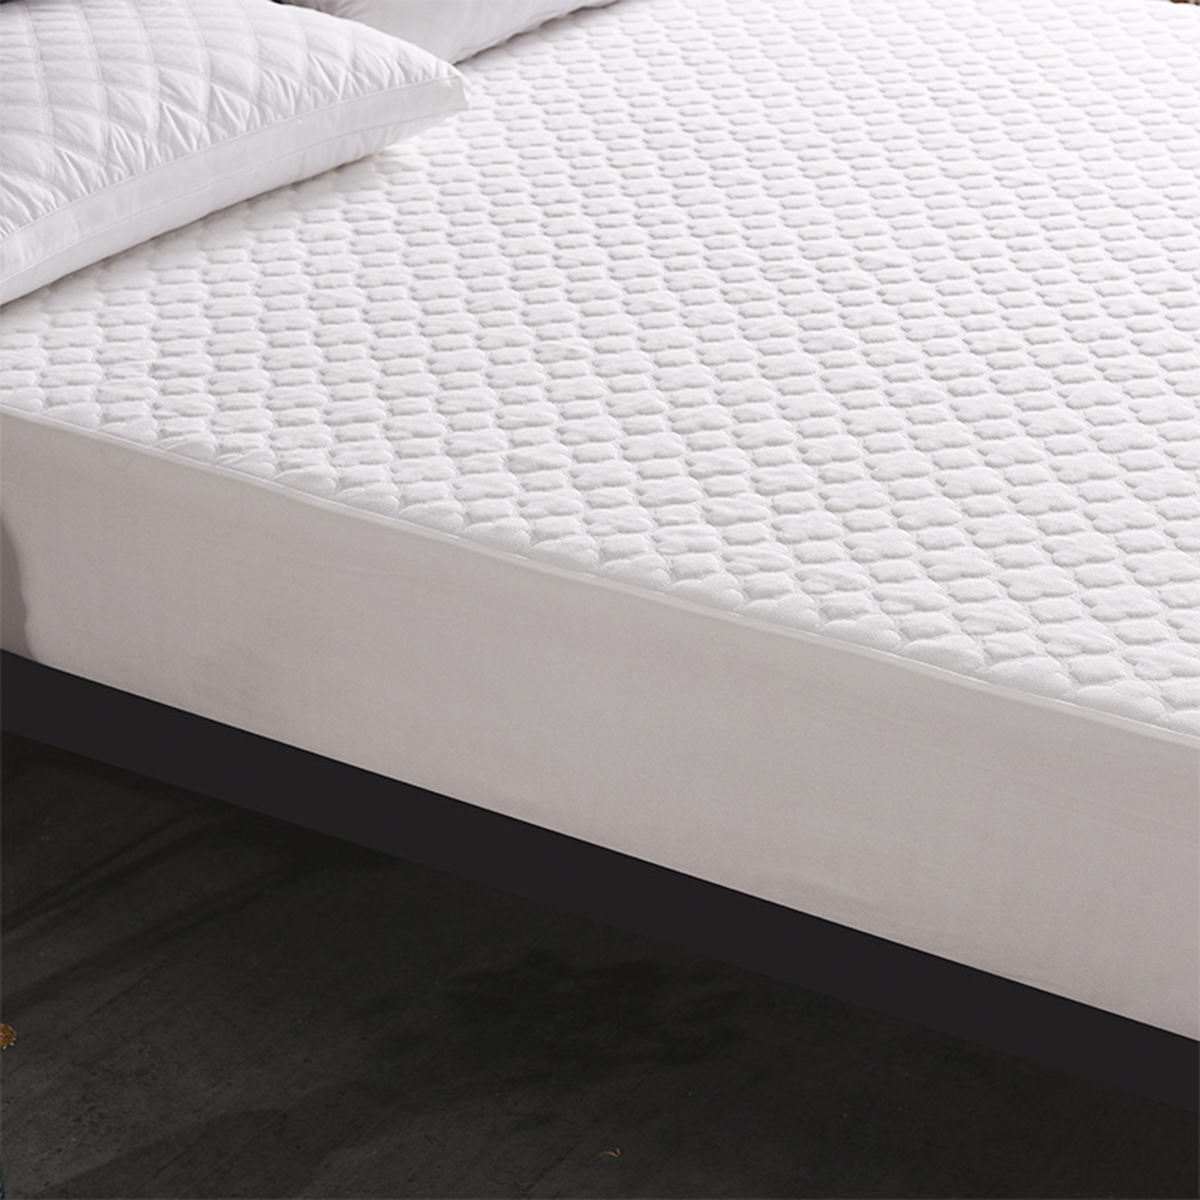 Multi-size-Washable-White-Quilted-Mattress-Covers-Waterproof-Protector-Pad-With-Tightly-Elastic-Band-1692754-12